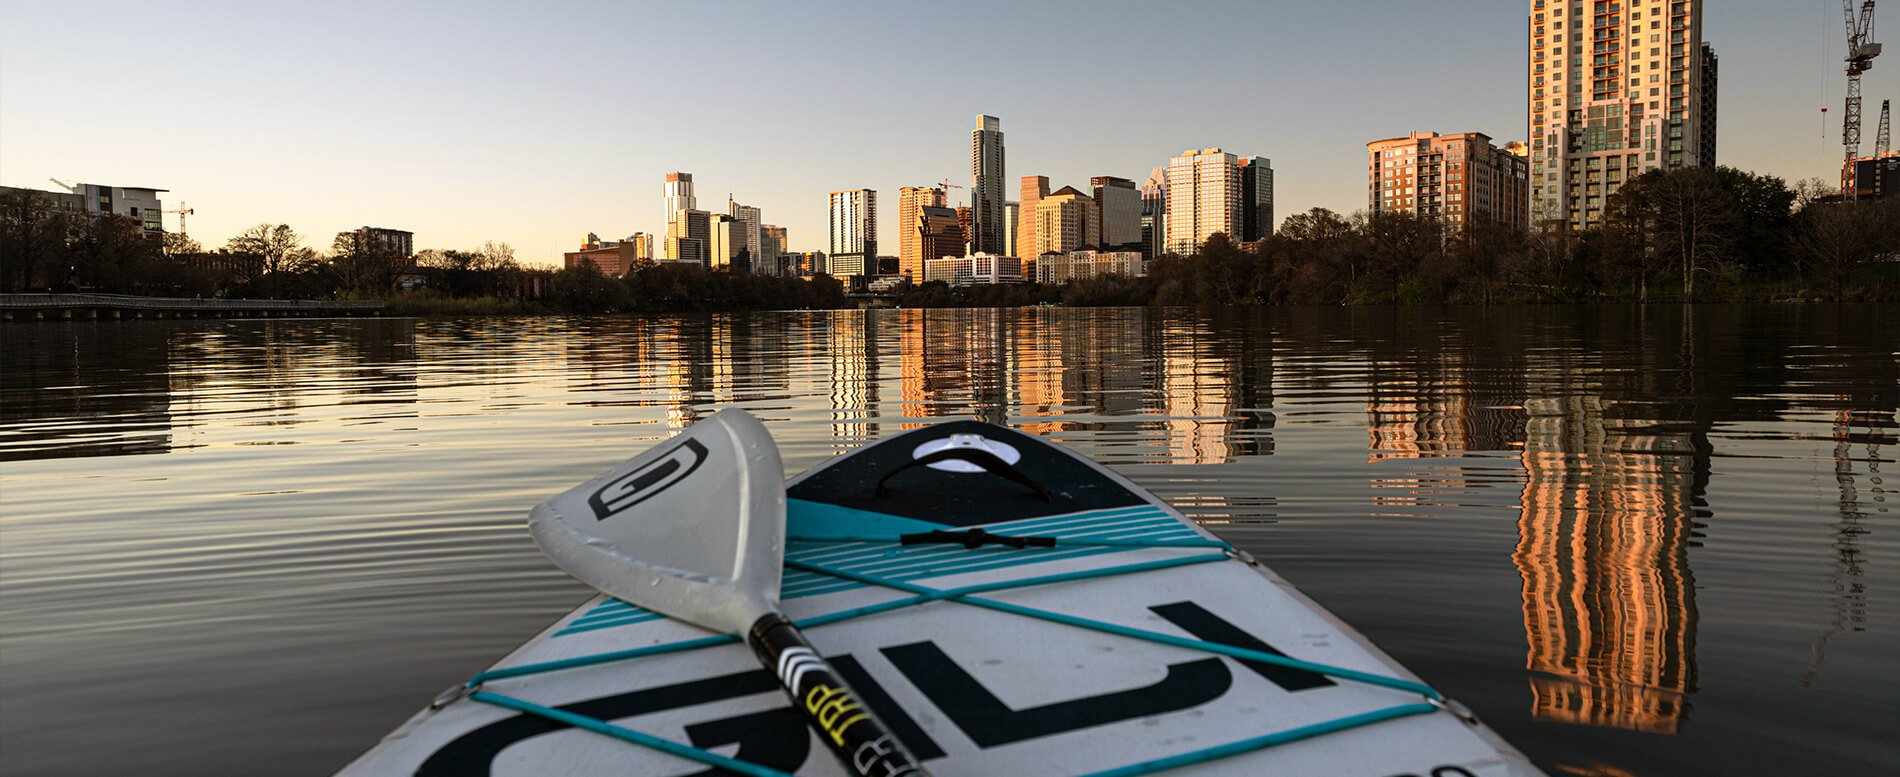 The 11 Best Places For Paddle Boarding In Austin, Texas